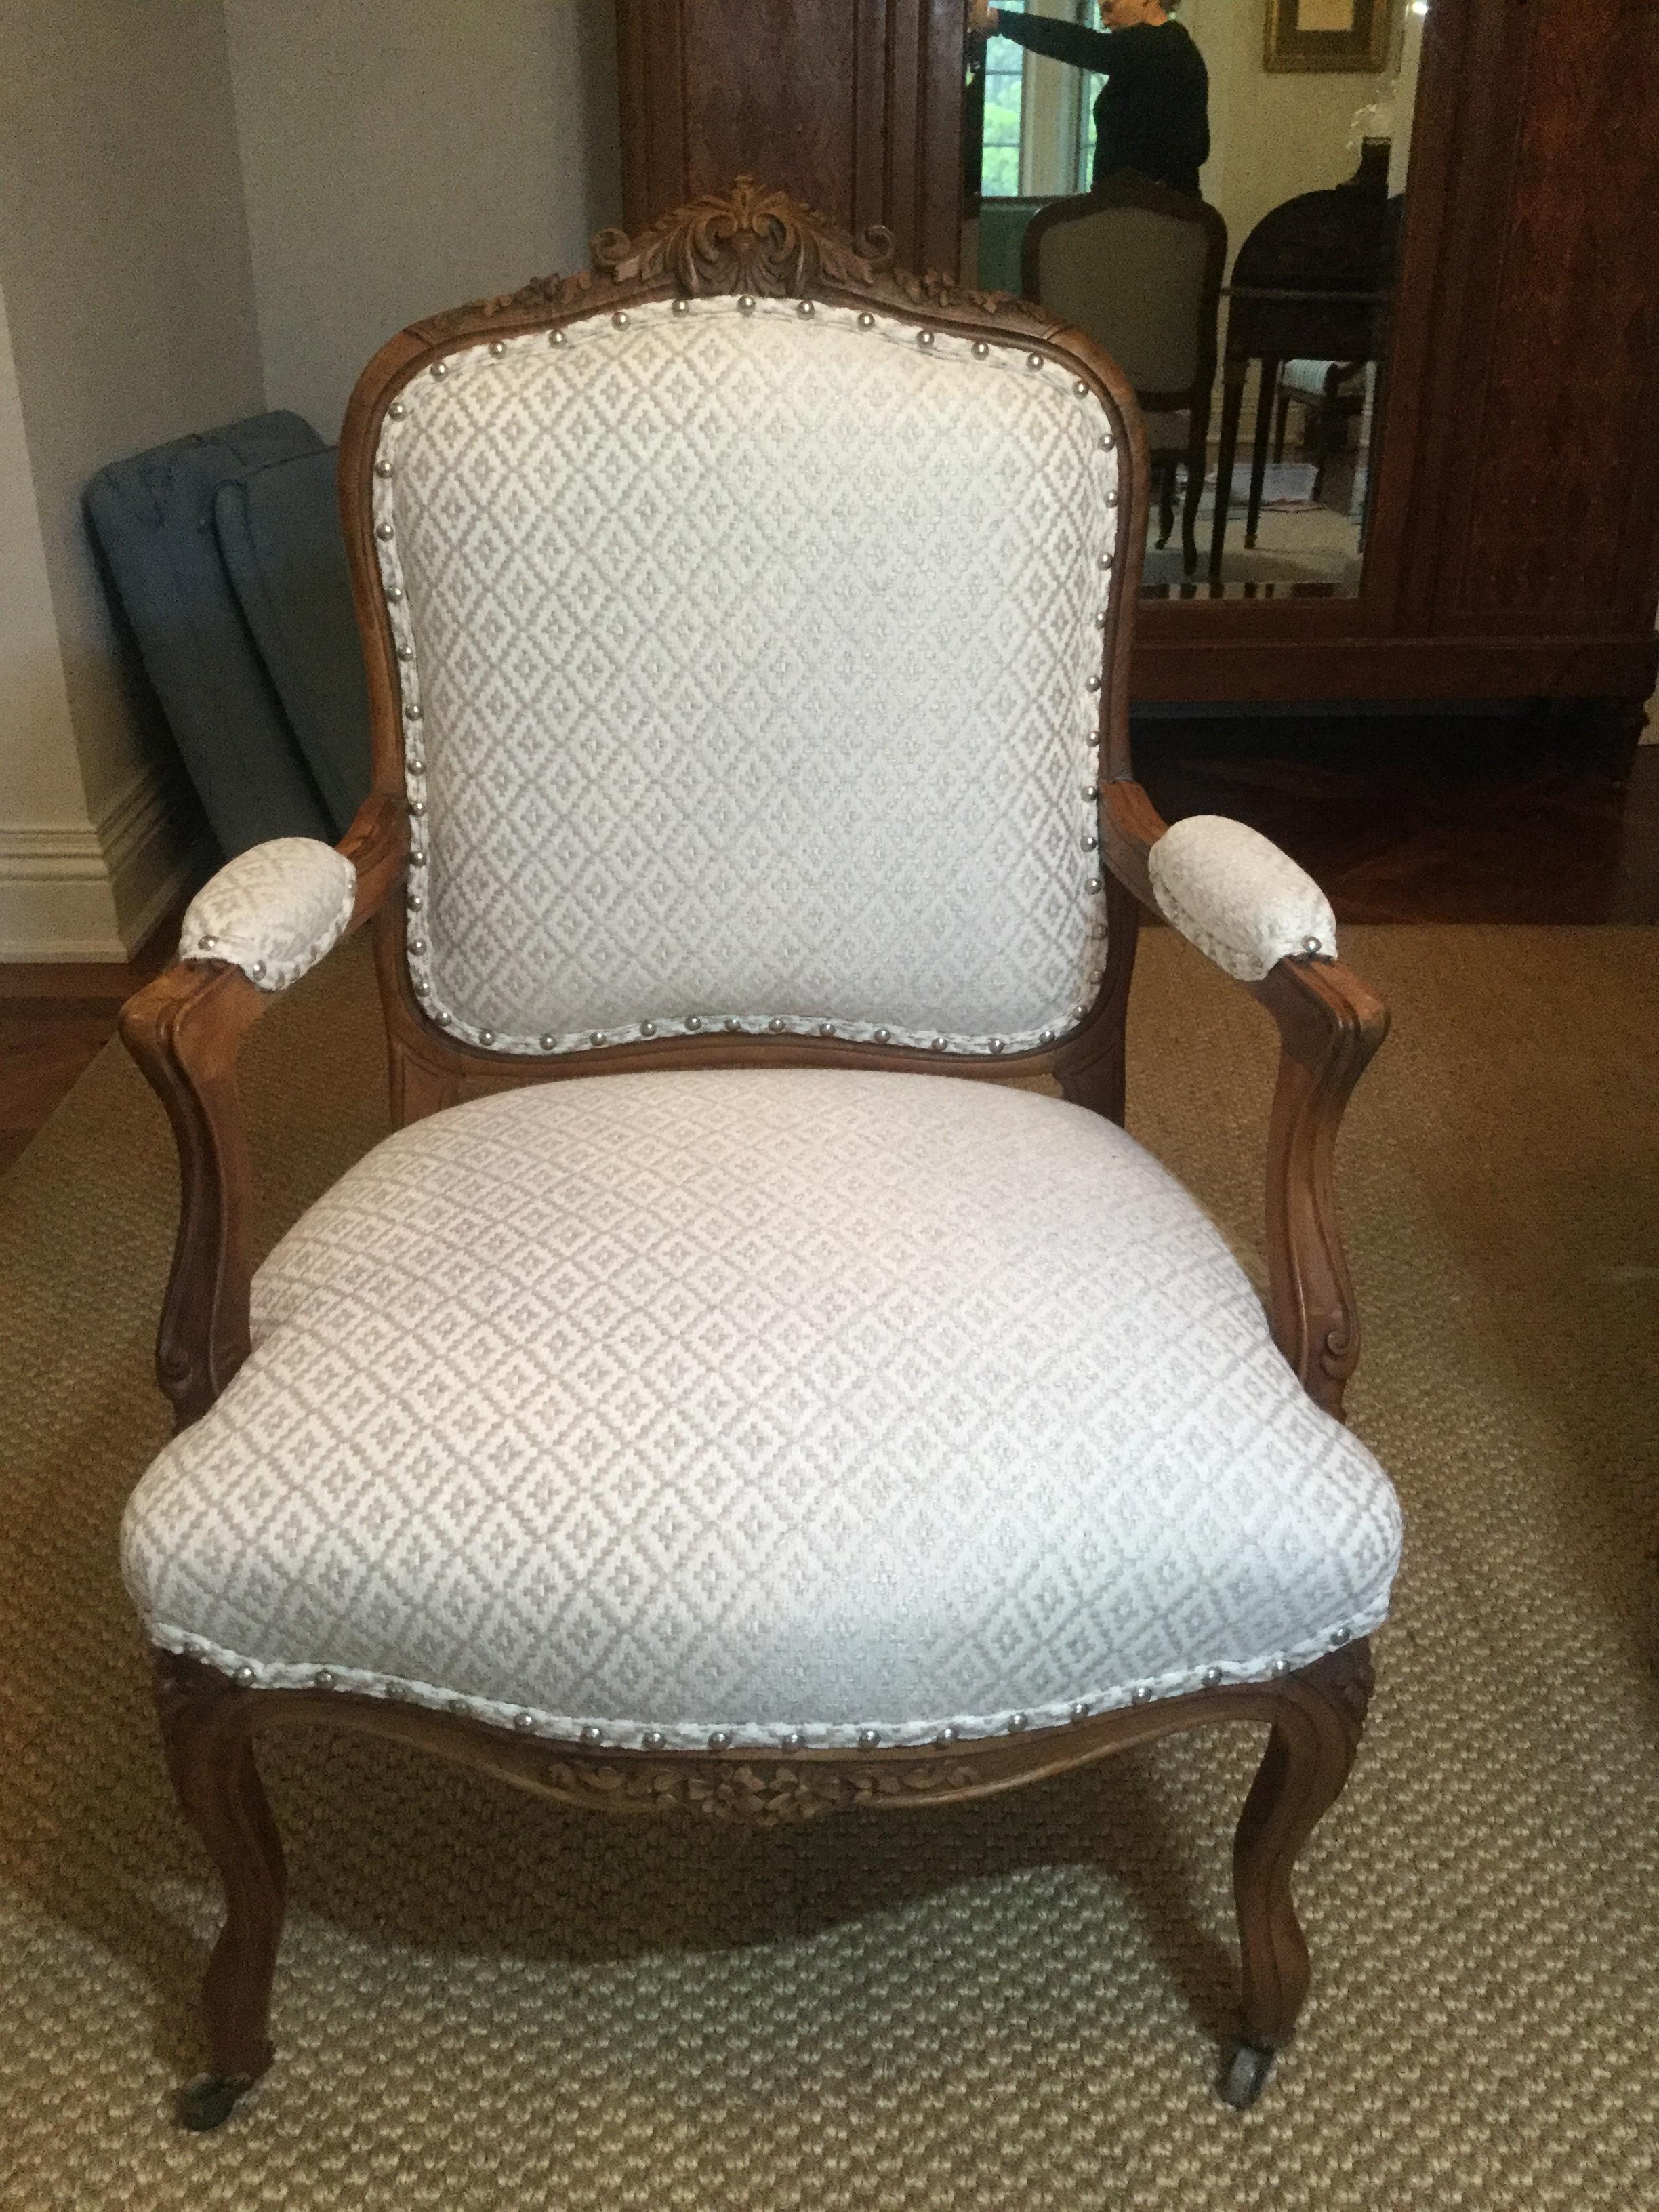 Stunning pair of later 19th century French armchairs. Made of walnut, these chairs feature a beautifully carved frame with floral motifs at the crest and on the legs. The designer upholstery is a white on white diamond pattern. There are silver